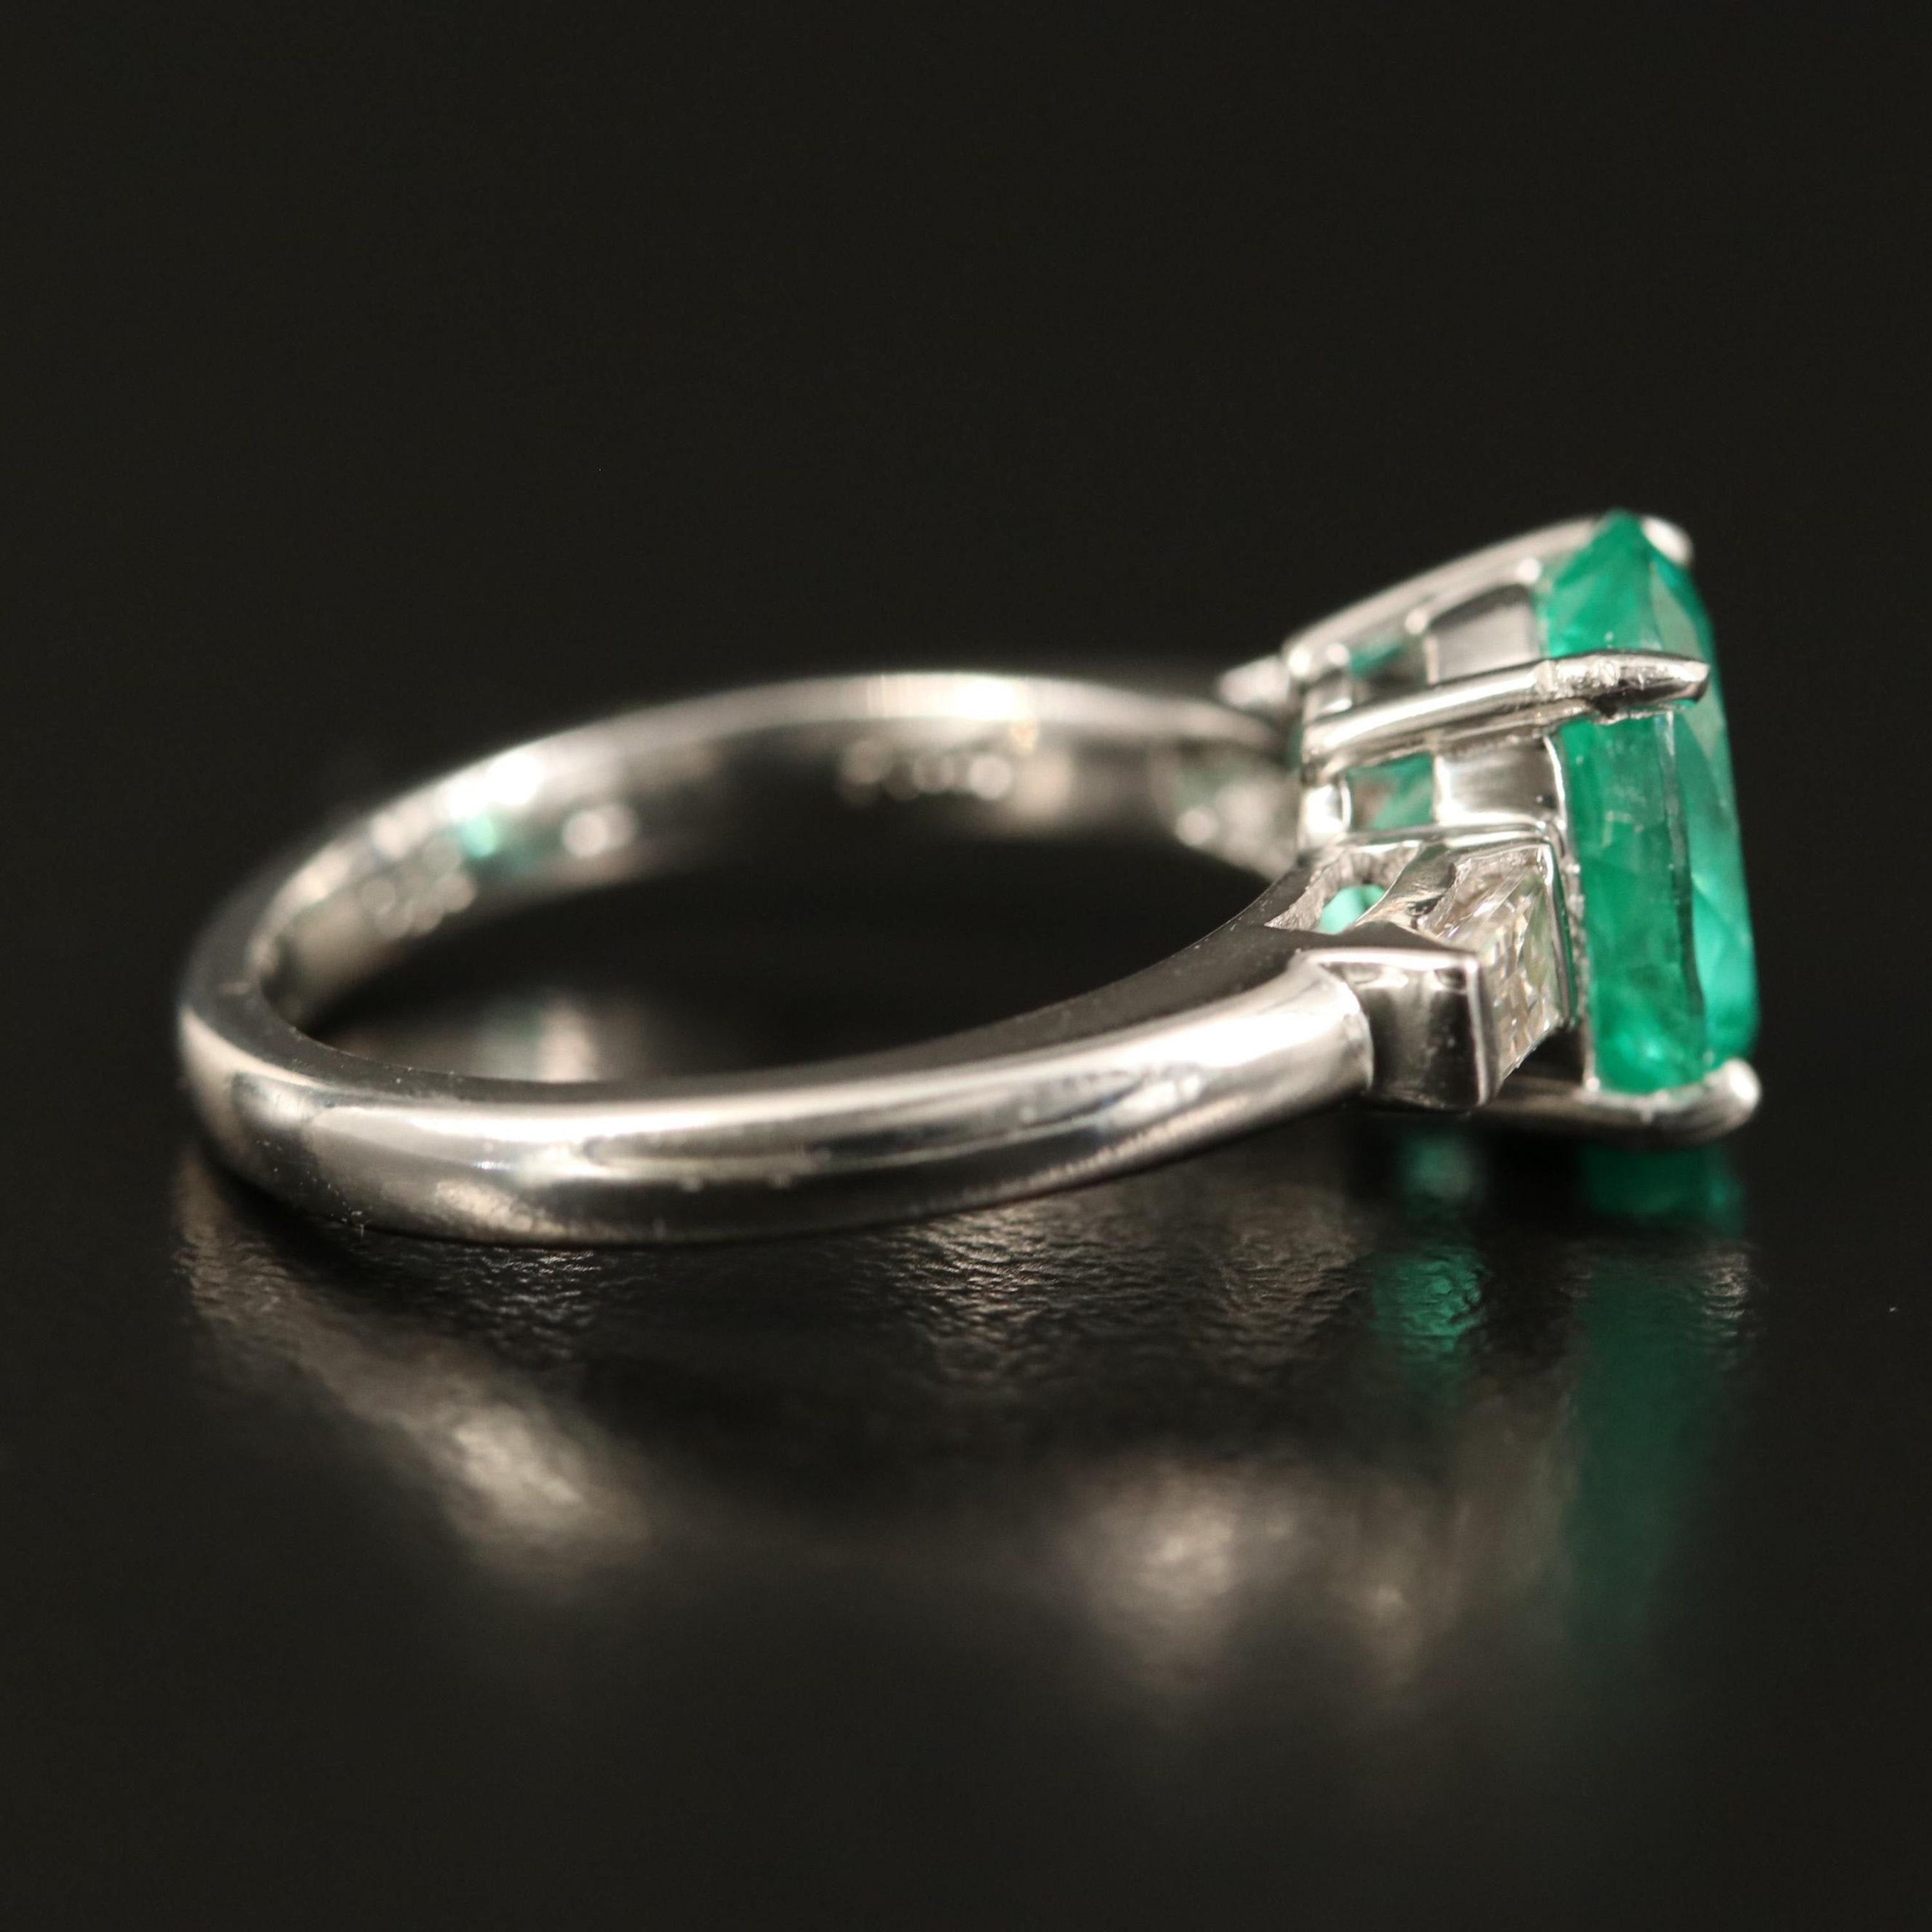 For Sale:  3 Carat Natural Colombian Emerald Engagement Ring, Minimal Emerald Wedding Ring 6